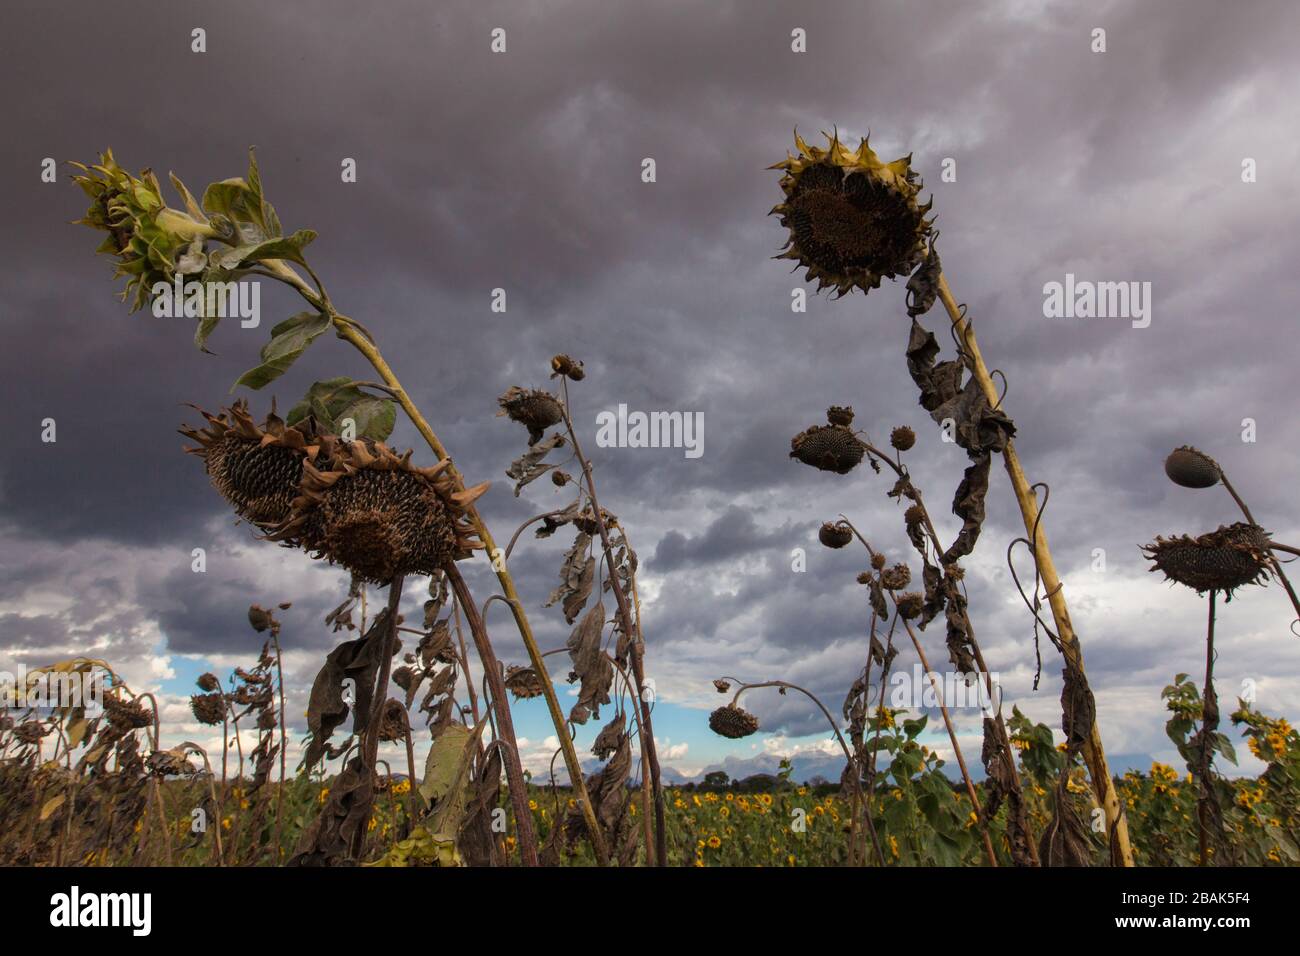 Field of dying sunflowers beneath storm clouds in southern Malawi. Stock Photo